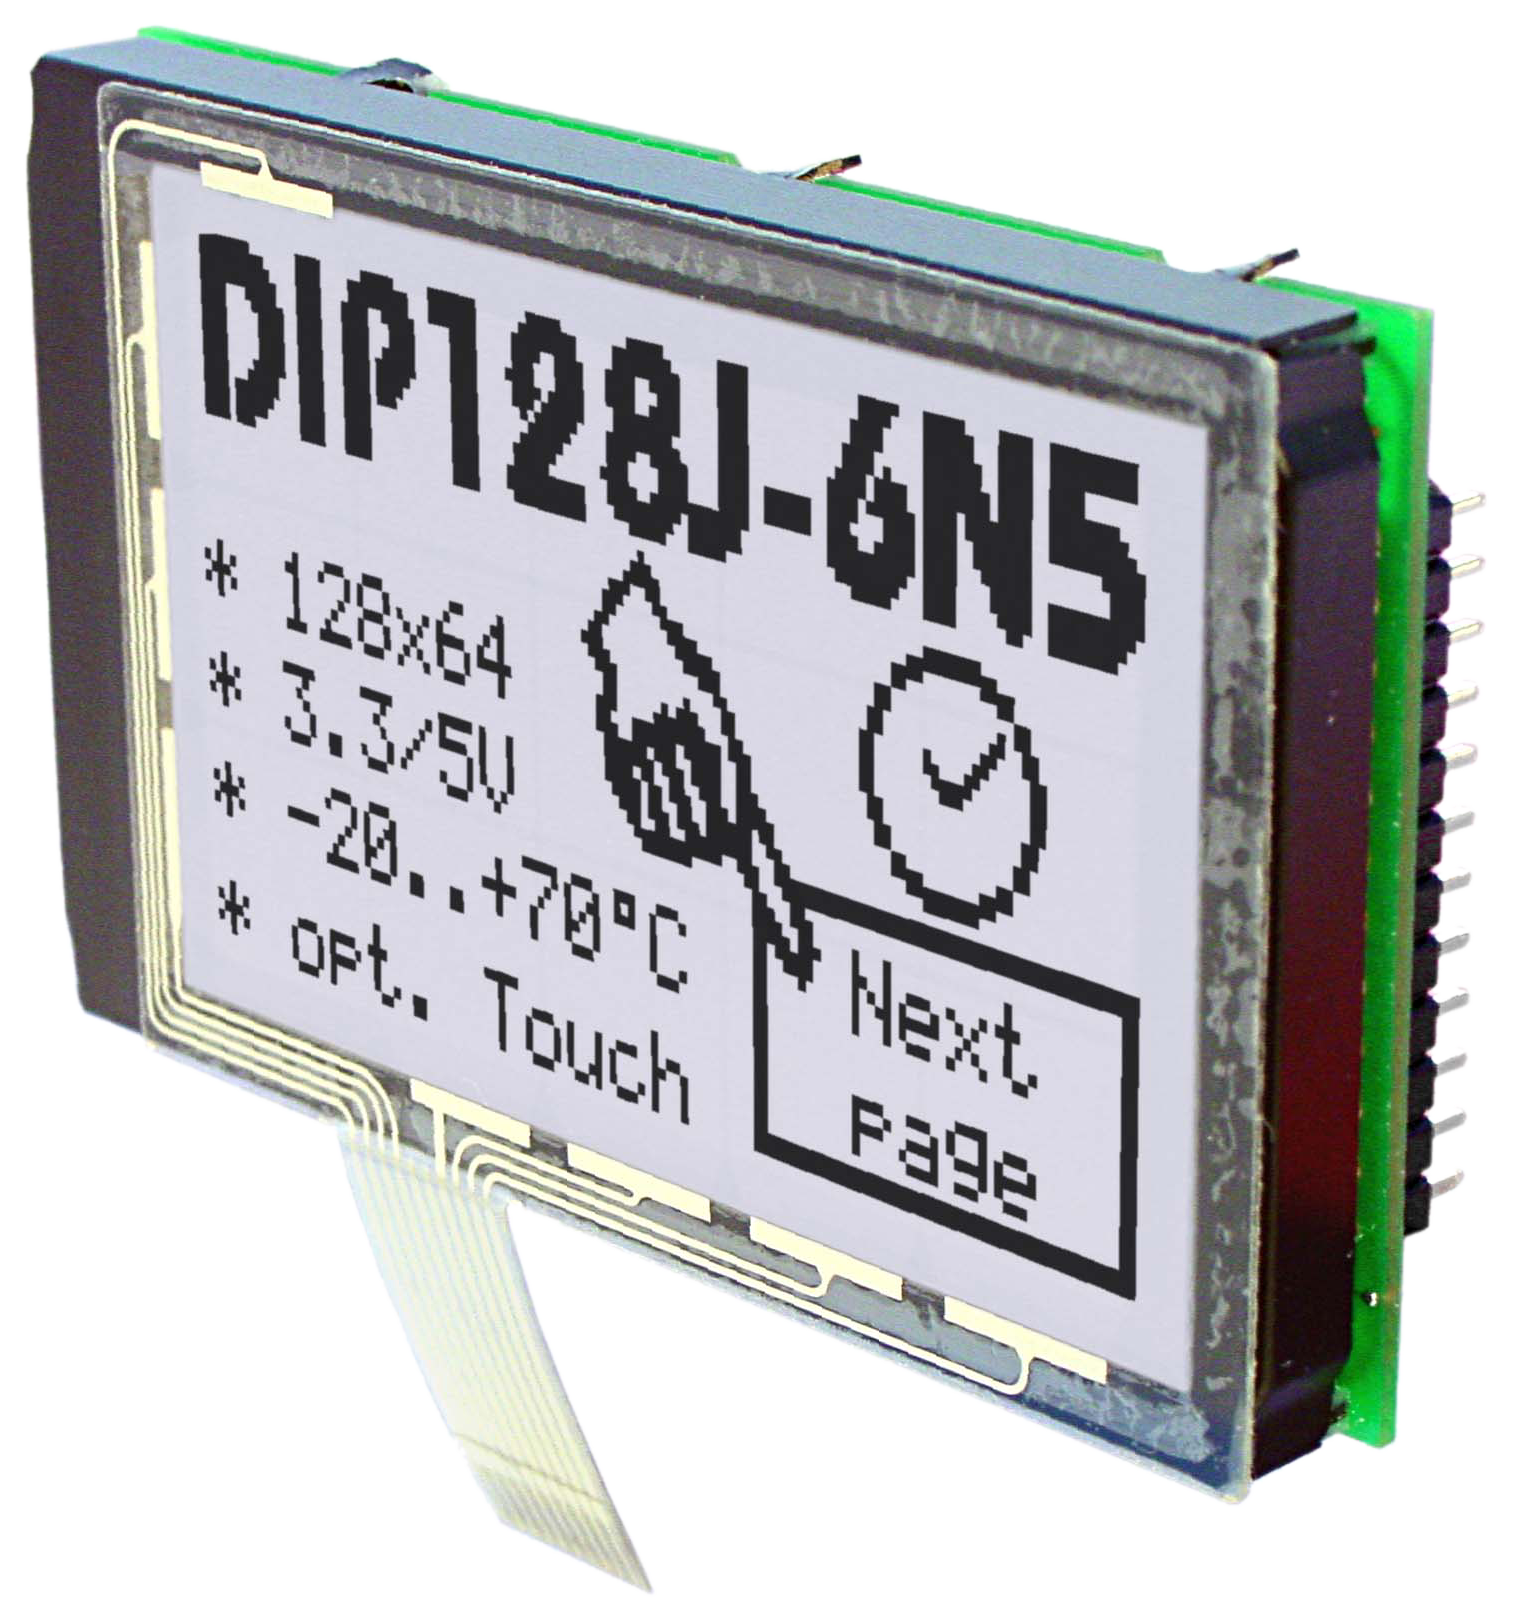 high-quality Displays in Chip on Board (COB) TEchnik, hier EA DIP128 als Grafikdisplay mit 128x64 Pixeln long availability, also available in small quantities